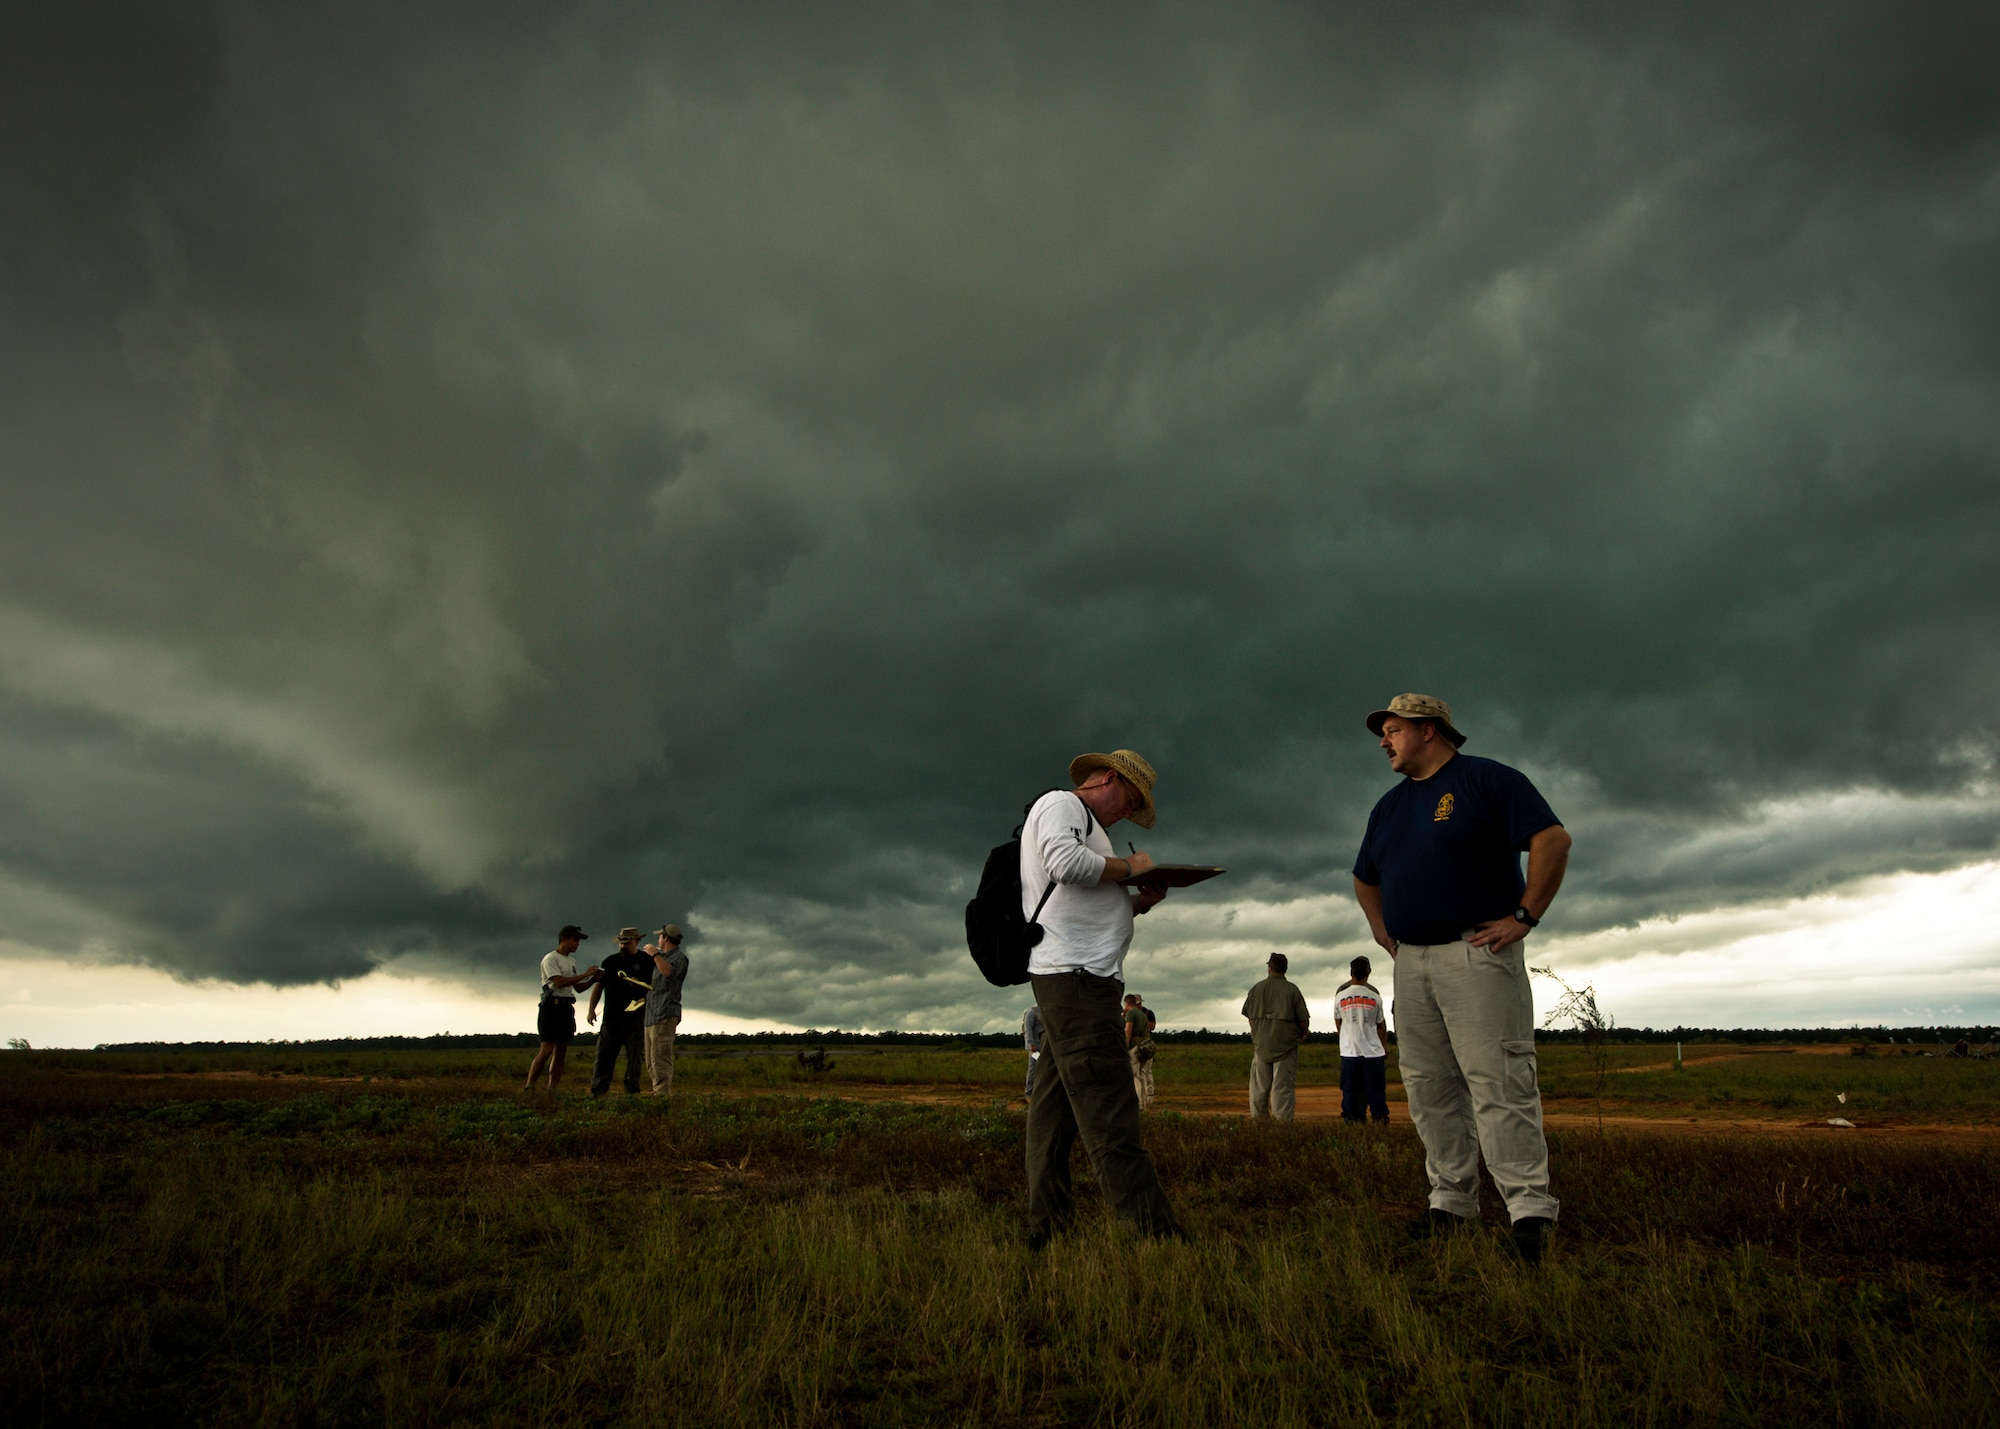 Detective Damon Sullivan, from the Leon County Sheriff’s Office, and others interview the key witnesses at the scene of the blast as a storm cloud rolls across Eglin Air Force Base’s range Sept. 28.  The interviews were part of the FBI's large vehicle post blast school attended by state and local law enforcement agencies as well as Navy and Air Force explosive ordnance disposal technicians. Three vehicles were blown up to create the crime scenes that students would investigate. The week-long course was the second held on Eglin with 67 students representing 18 different U.S. agencies. (U.S. Air Force photo/ Samuel King Jr.)